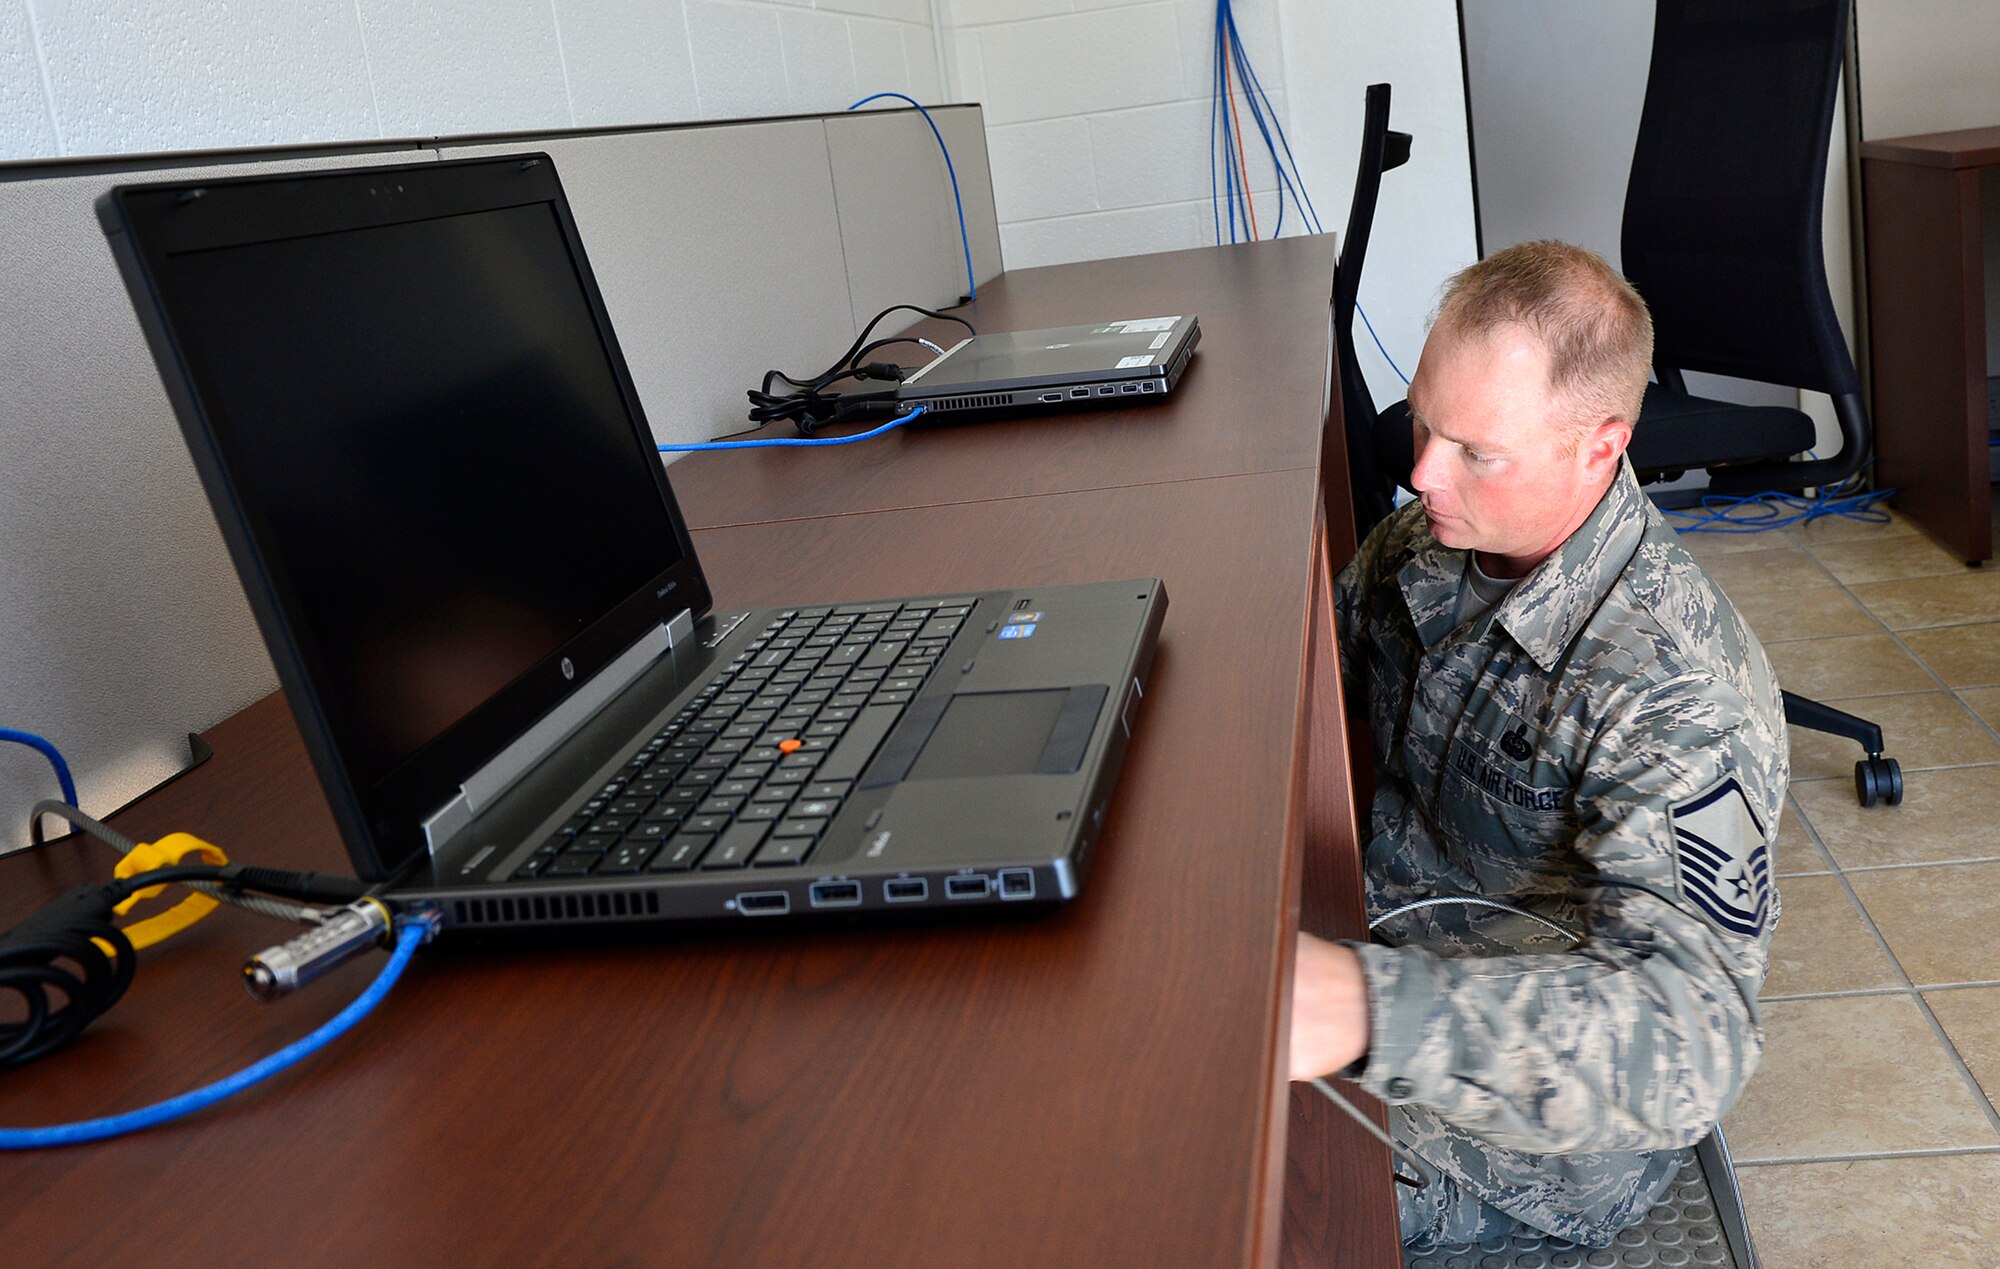 MCGHEE TYSON AIR NATIONAL GUARD BASE, Tenn. -- Master Sgt. Charles Hoover, Cyber Operations manager for the I.G. Brown Training and Education Center, installs cable locks Oct. 22, 2014, here on laptop computers in the Morrisey Hall classroom building. The 21 computers as well as recently installed office furniture are part of two cyber cafes coming online near the downstairs entrances. (U.S. Air National Guard photo by Master Sgt. Mike R. Smith/Released) 